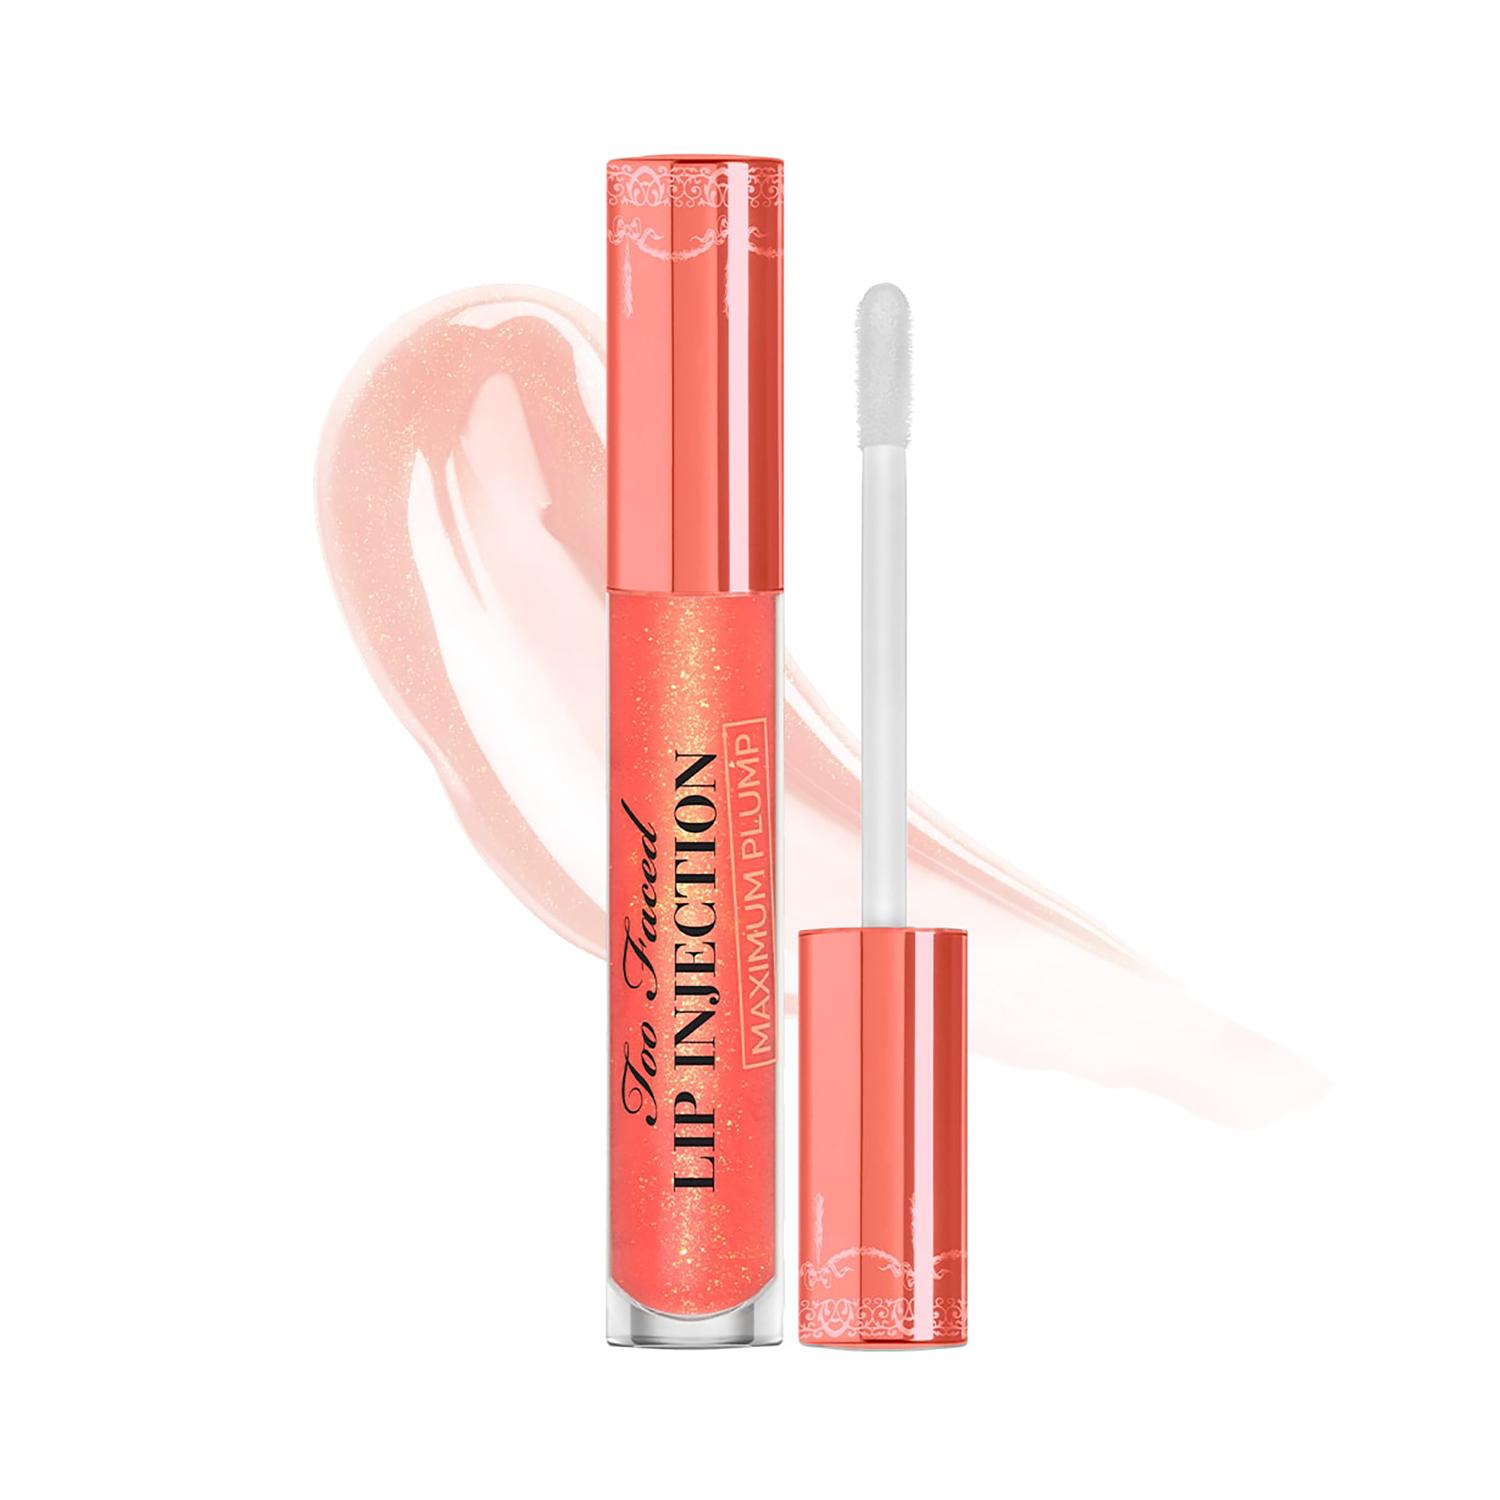 Too Faced | Too Faced Lip Injection Maximum Plump Lip Plumper - Creamsicle Tickle (4g)